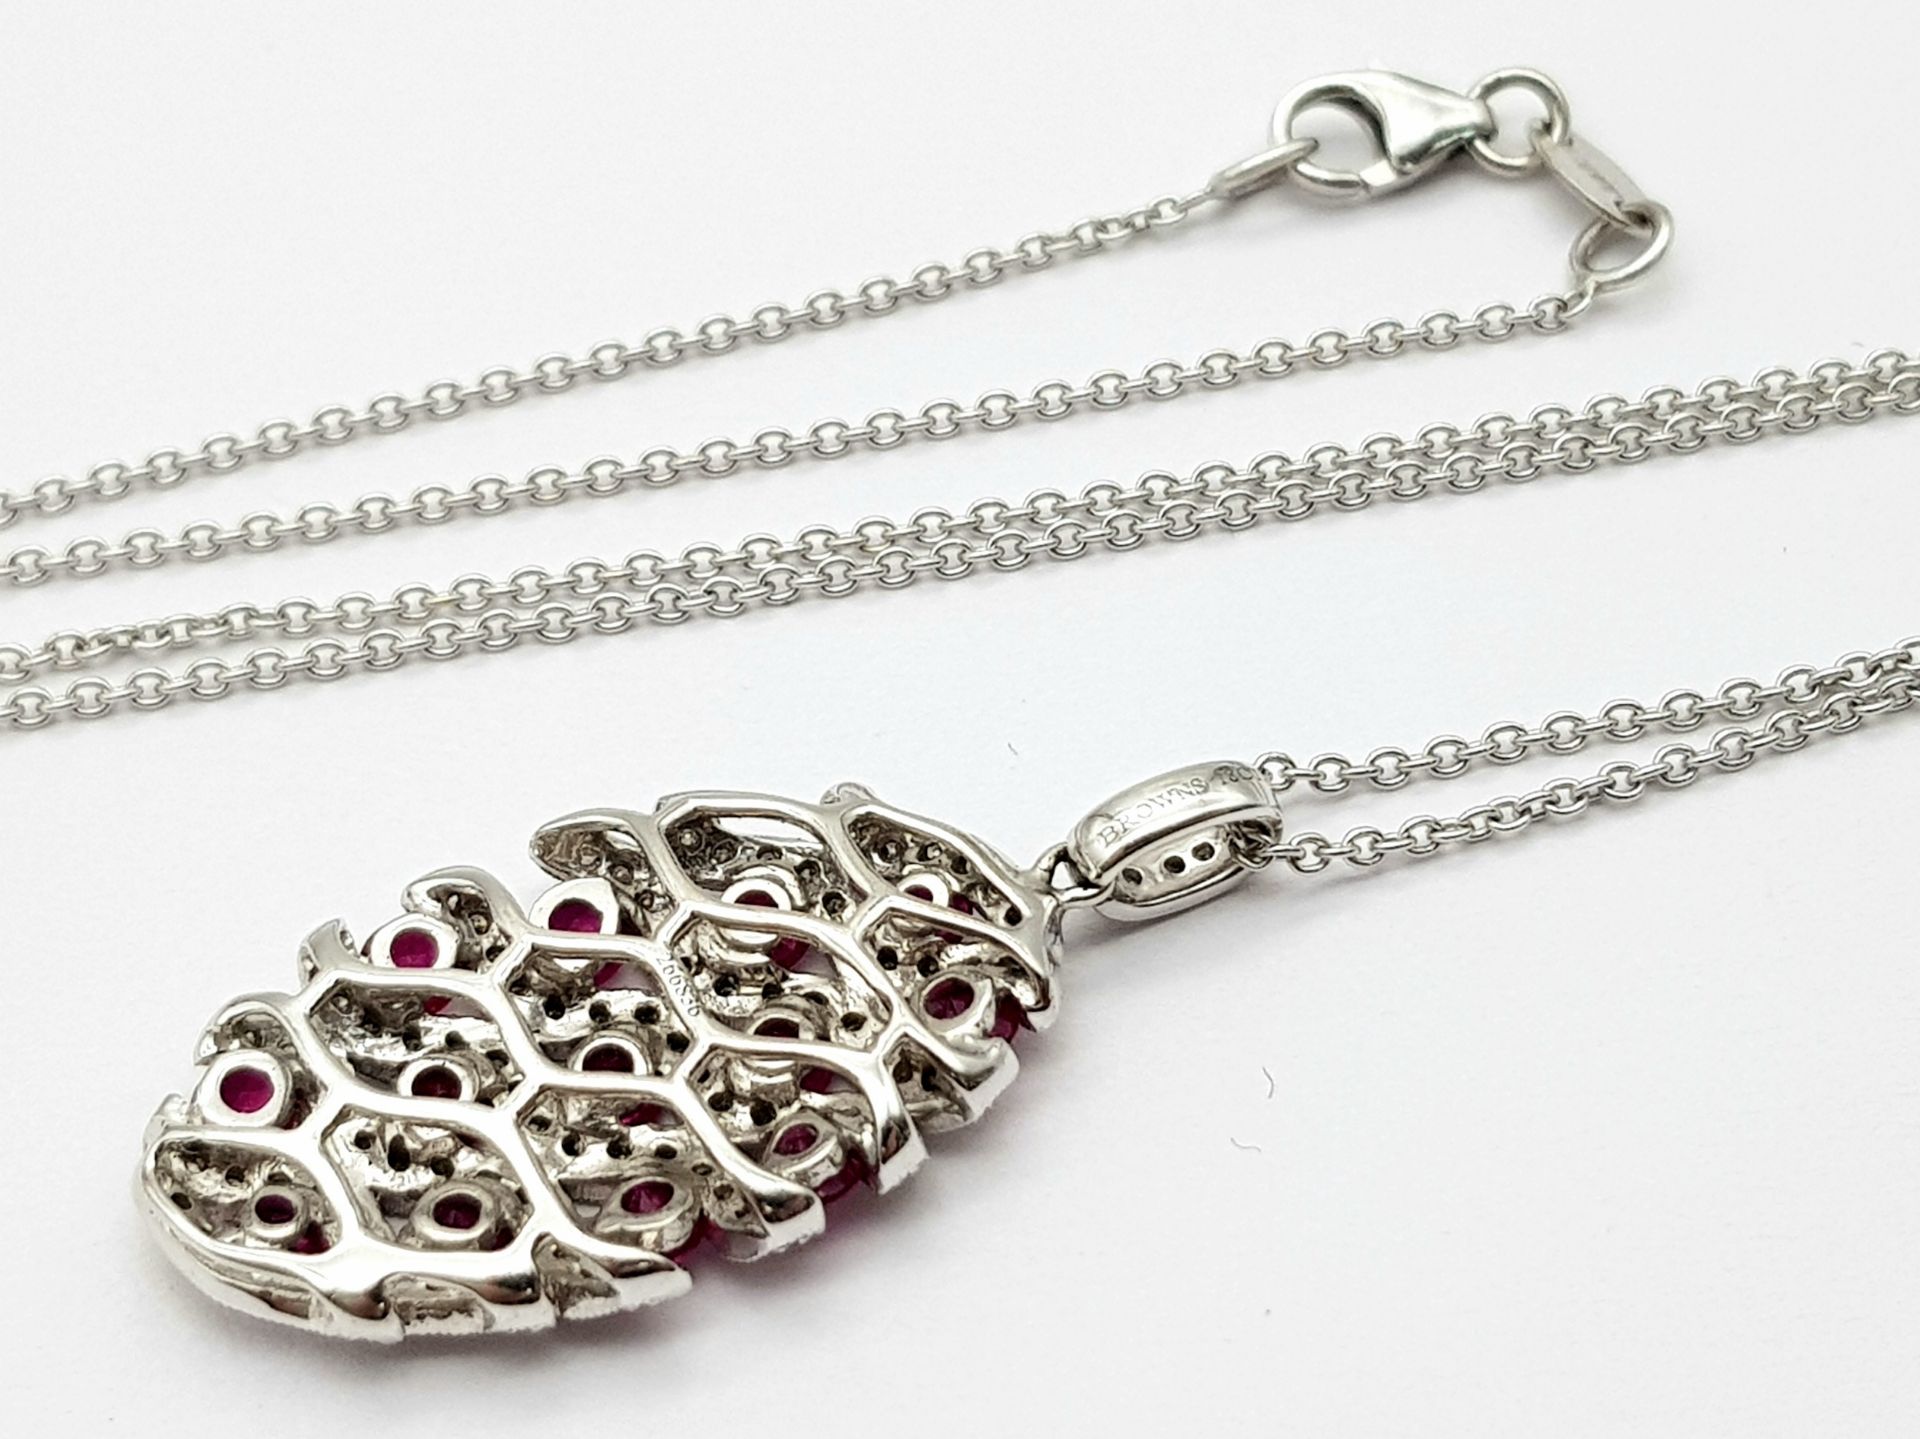 AN 18K WHITE GOLD DIAMOND AND RUBY PENDANT - 0.49CT OF DIAMONDS AND 2.29CT OF RUBIES. 6.2G WEIGHT. - Image 9 of 16